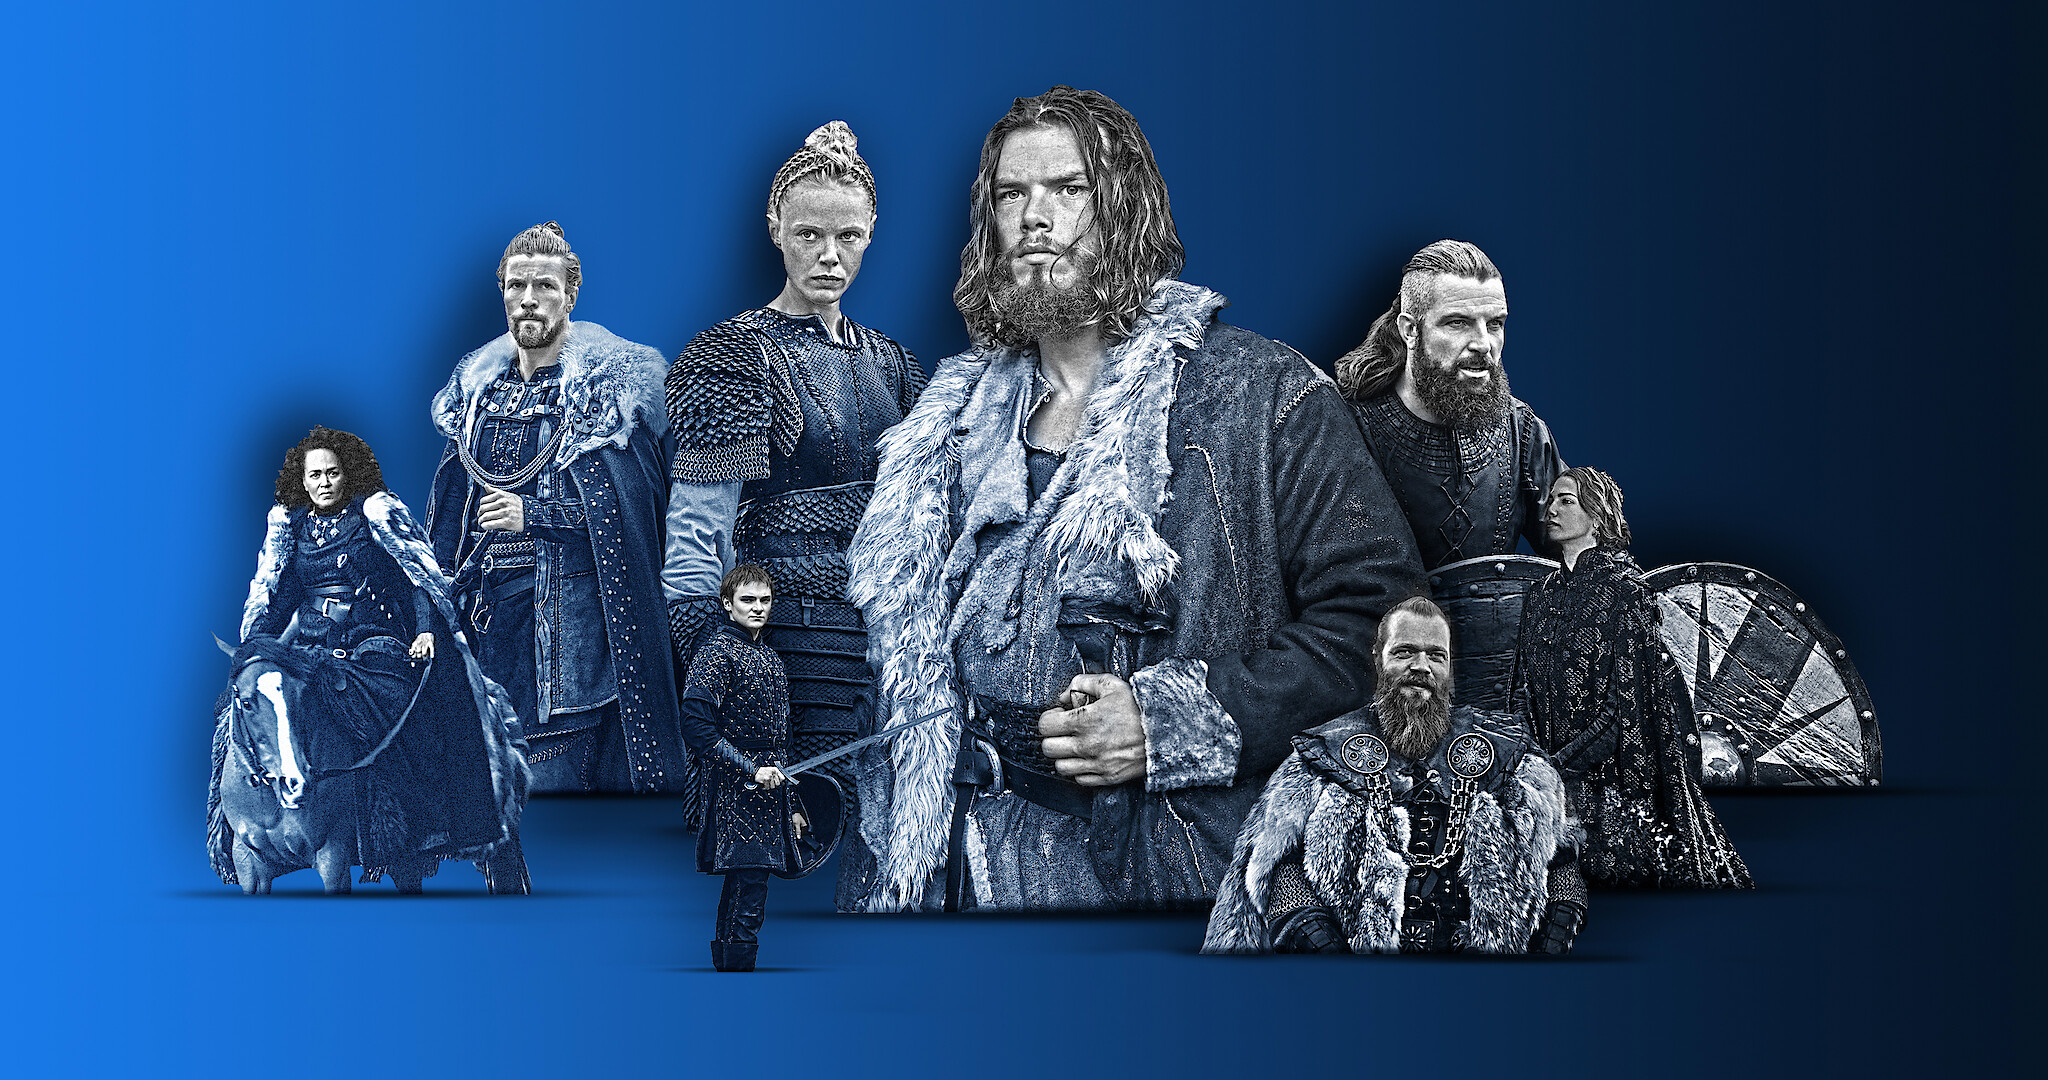 Vikings Valhalla Cast Who Plays Leif Eriksson, Freydis and more image